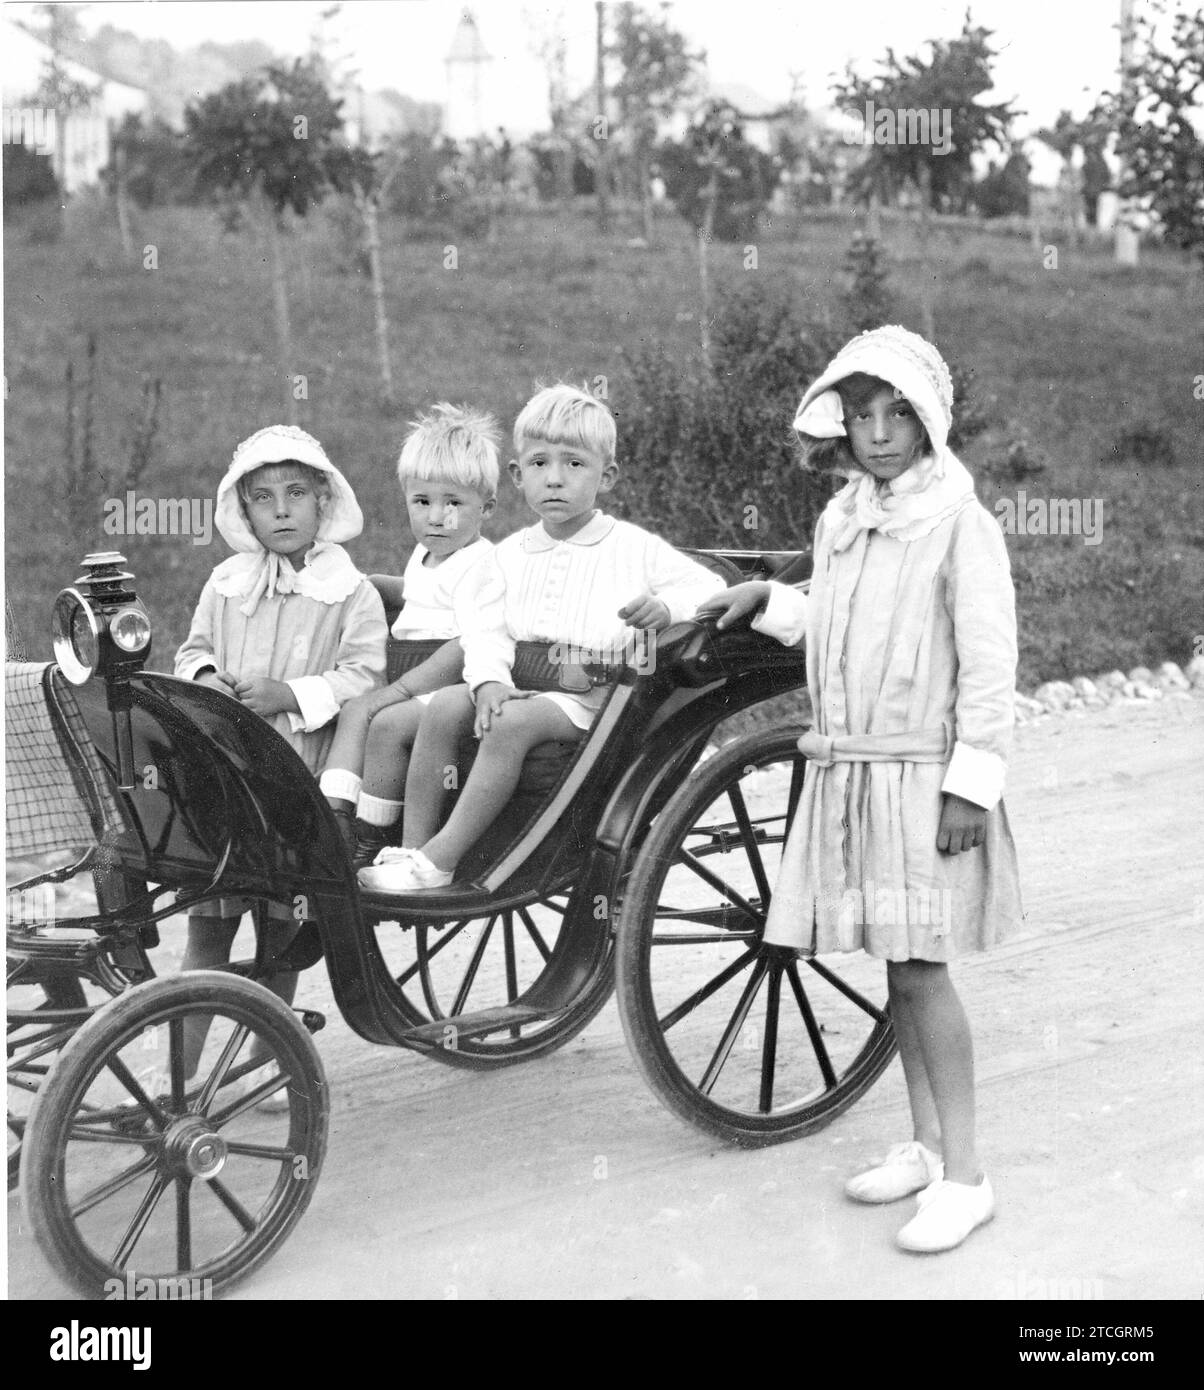 07/31/1916. The summer vacation of the Royal family. The Children of the Kings at the Polo field in Santander. From right to left, Ss. Ah. Rr. the Infants Doña Beatriz, D. Juan, D. Gonzalo and Doña María Cristina. Credit: Album / Archivo ABC / Ramón Alba Stock Photo